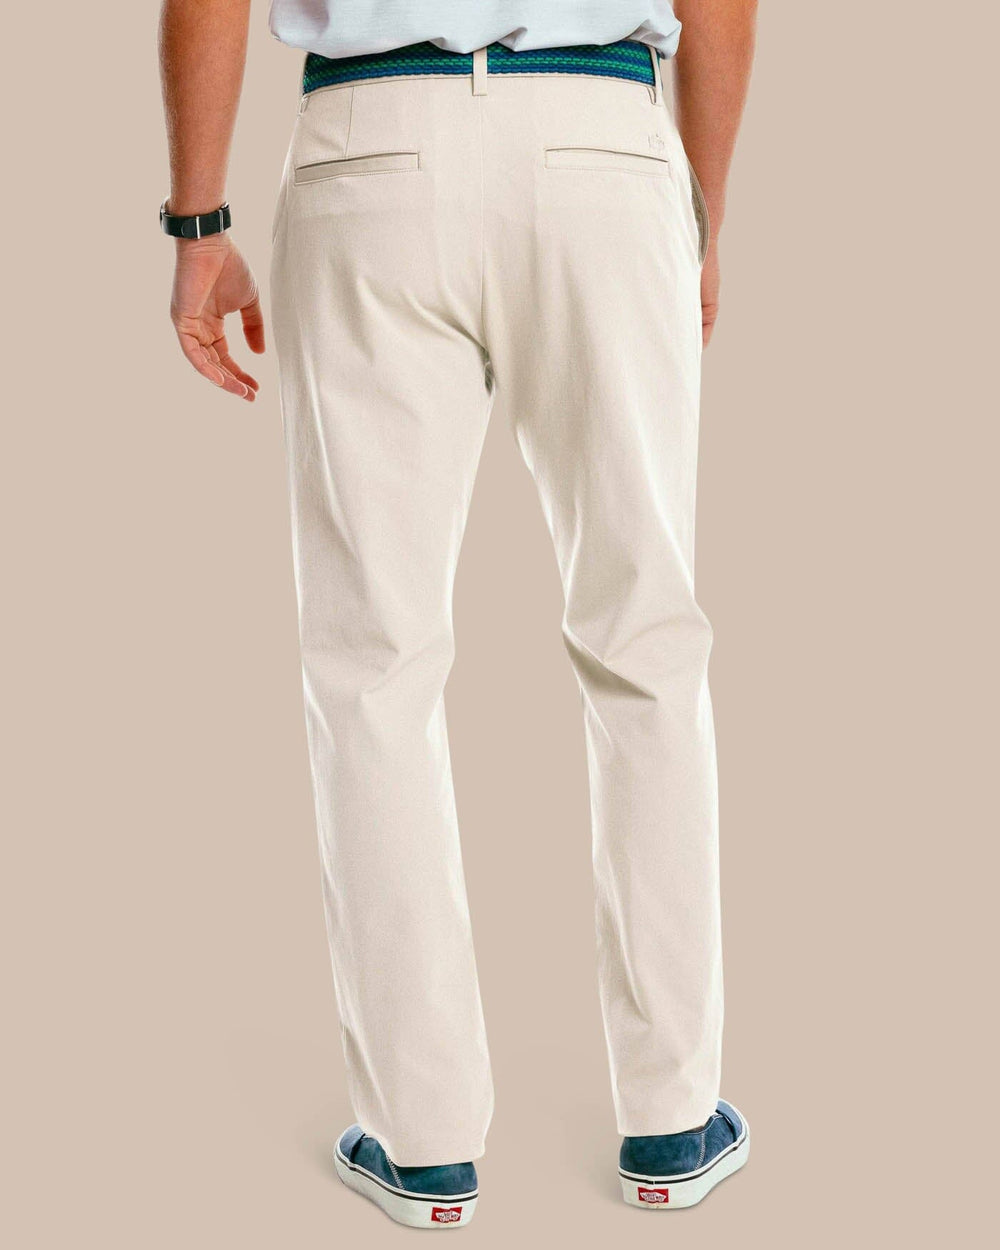 The back view of the Men's Jack Performance Pant by Southern Tide - Putty